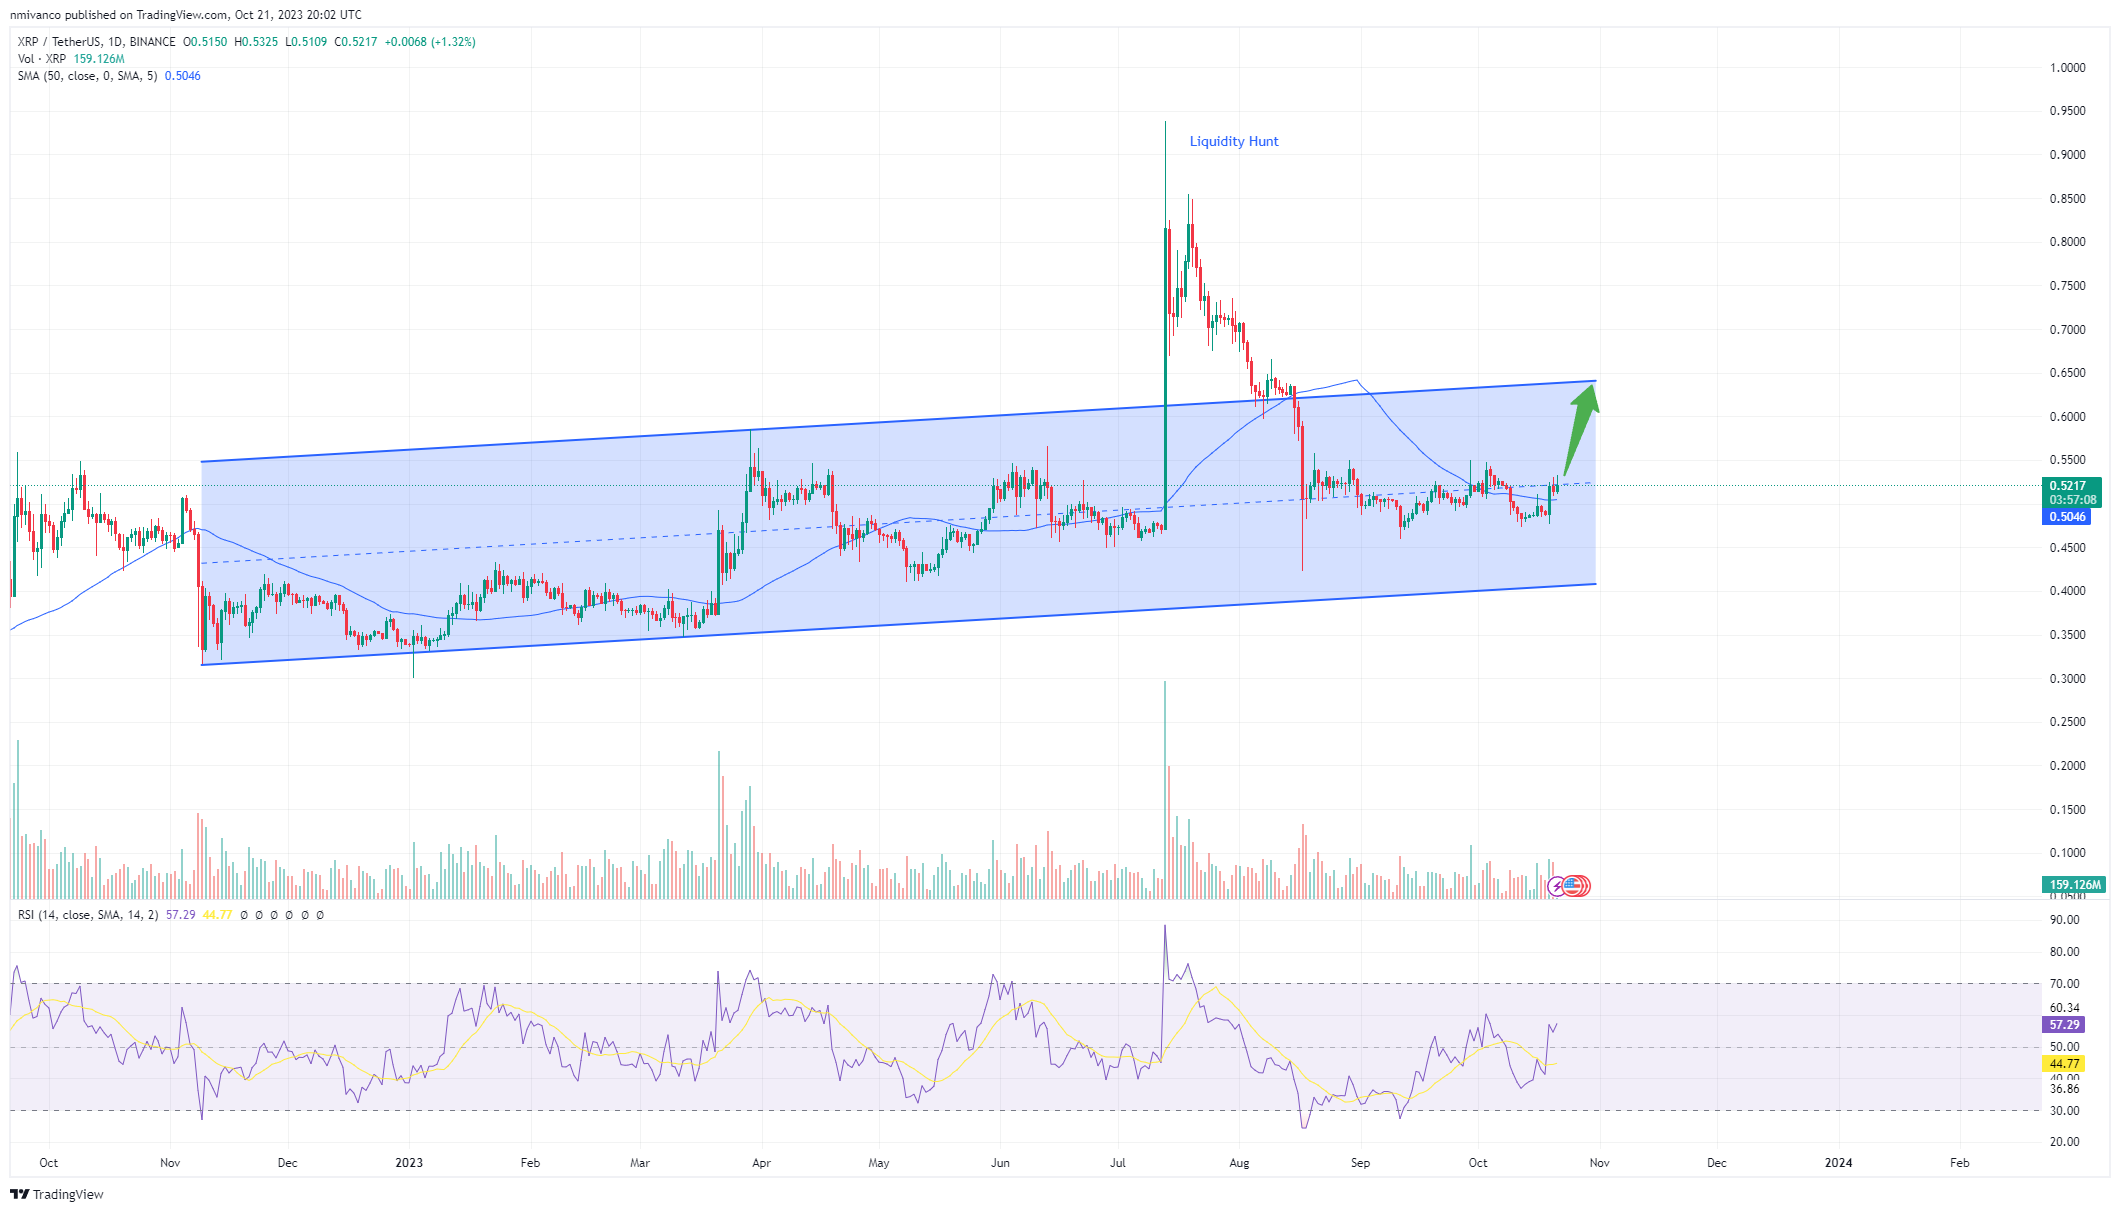 XRP/USDT chart from Tradingview.com